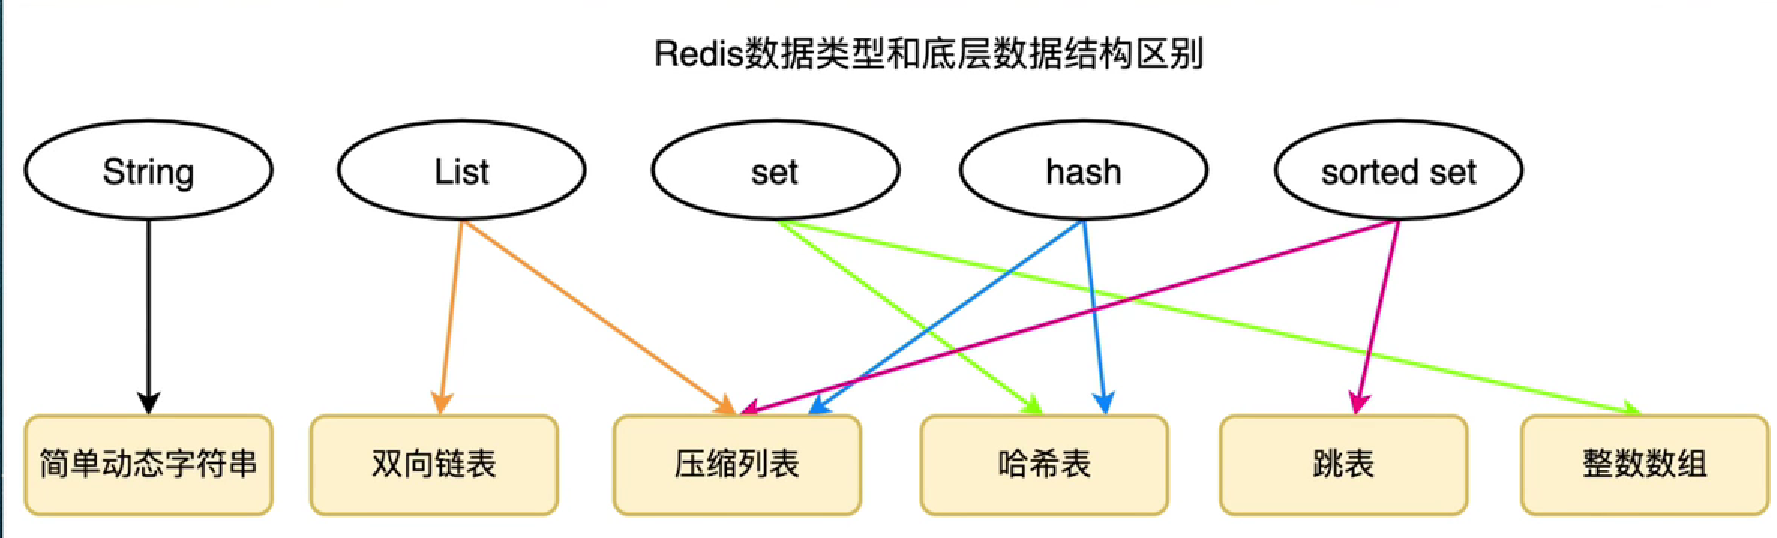 【<span style='color:red;'>Redis</span><span style='color:red;'>面试</span><span style='color:red;'>题</span>】<span style='color:red;'>Redis</span>常见<span style='color:red;'>的</span>一些<span style='color:red;'>高频</span><span style='color:red;'>面试</span><span style='color:red;'>题</span>